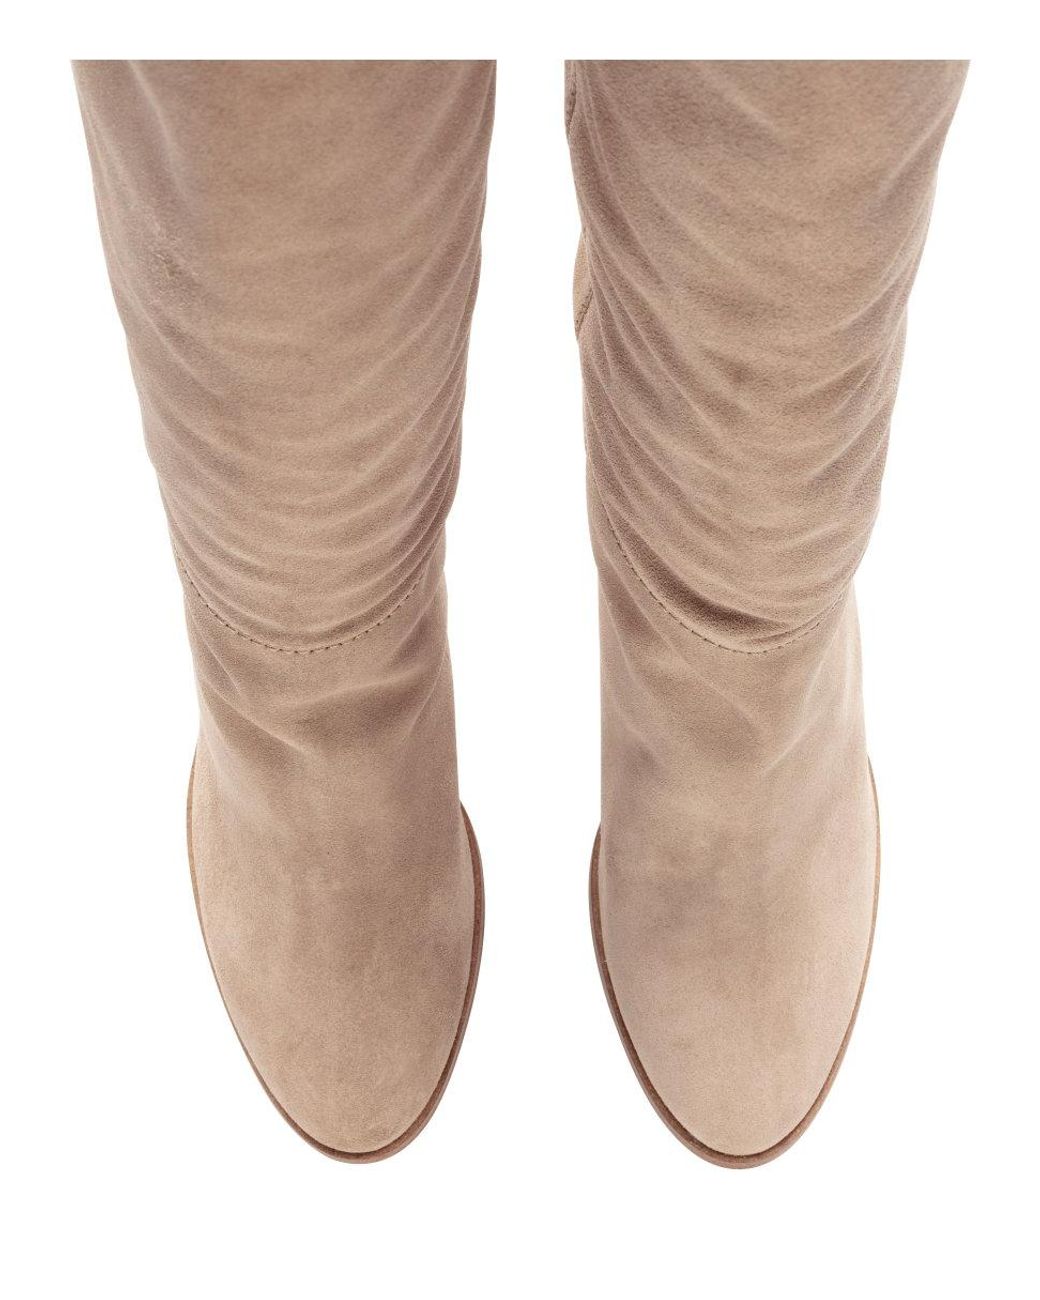 H&M Suede Knee-high Boots in Natural | Lyst